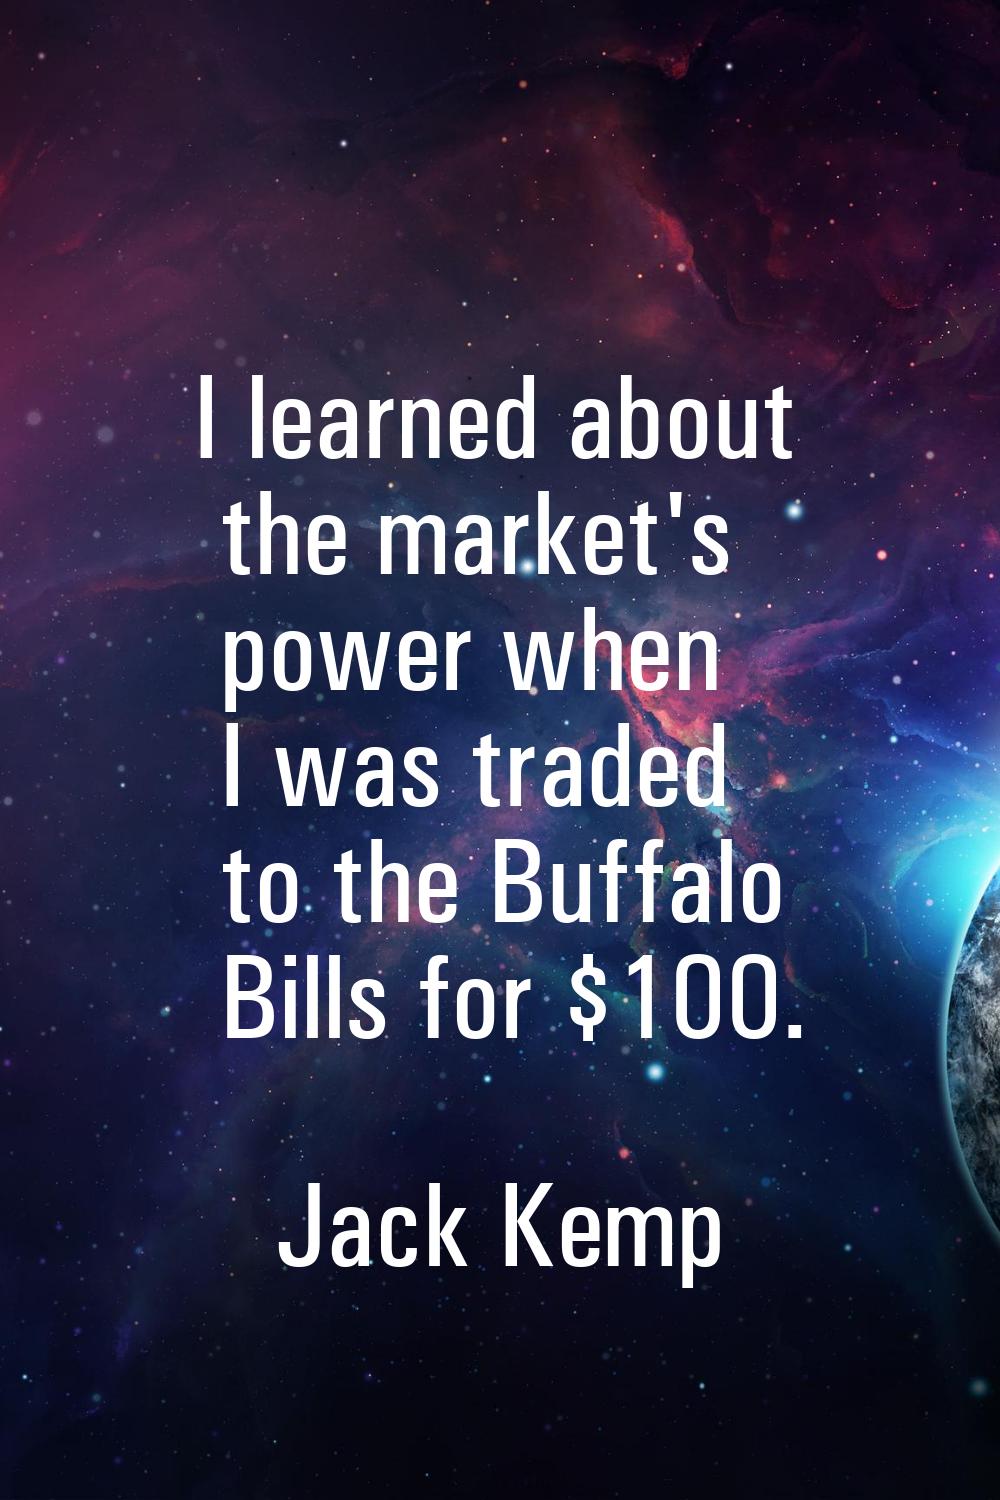 I learned about the market's power when I was traded to the Buffalo Bills for $100.